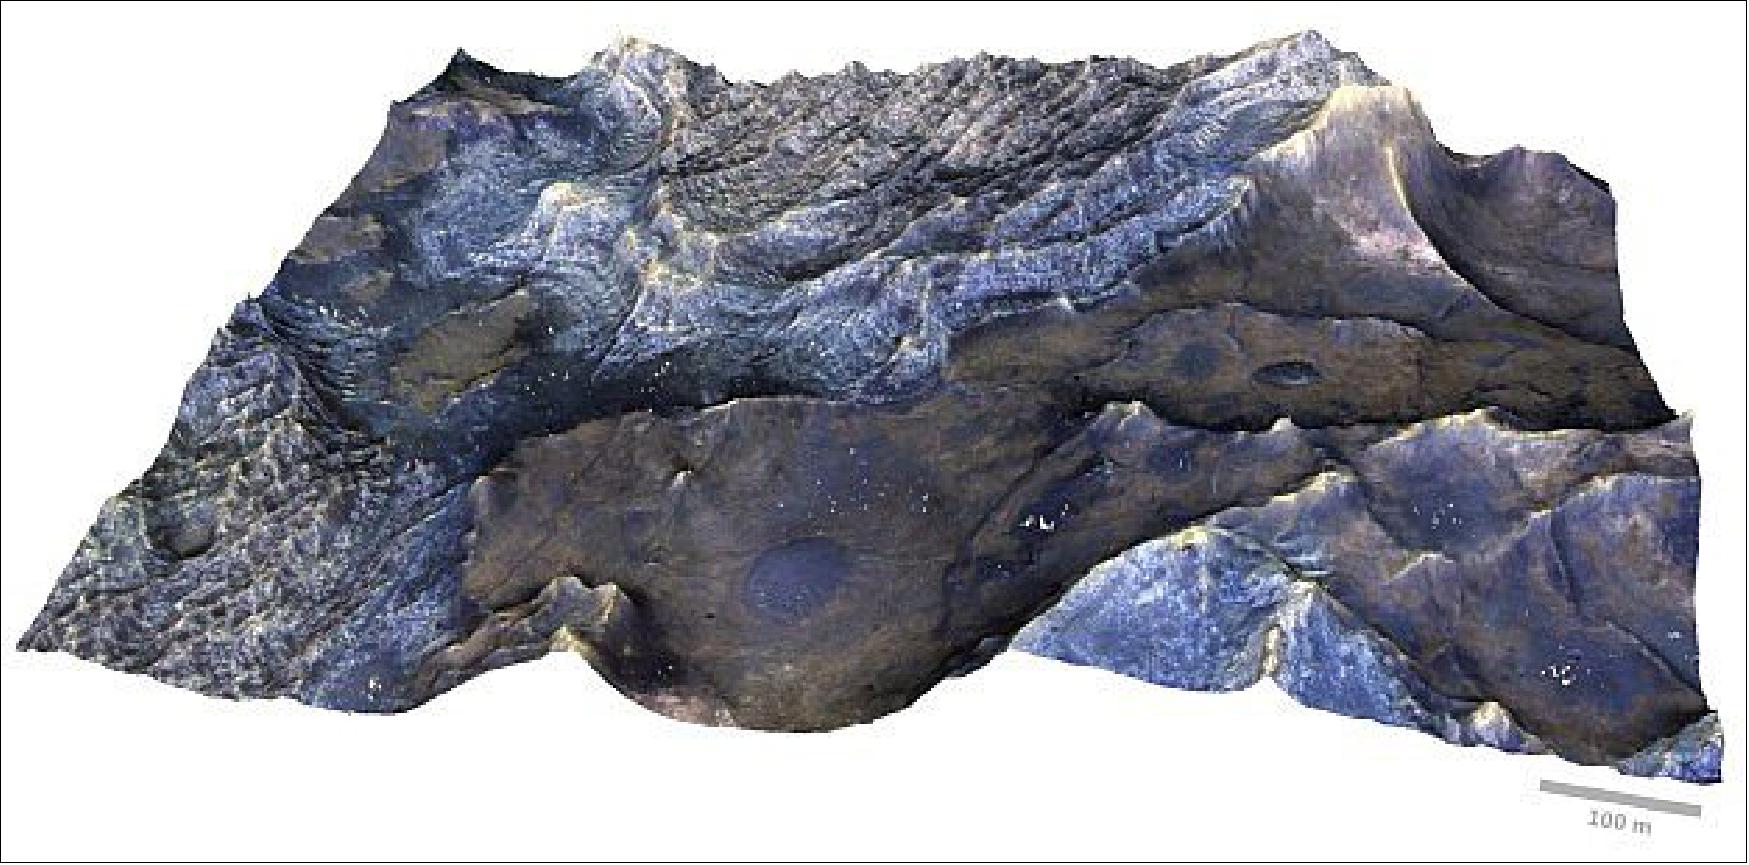 Figure 85: This high-resolution 3D model shows terrain on the surface of Mars in the vicinity of the Jezero crater, the future landing site for NASA's 2020 Mars Perseverance rover (image credit: Mars Express, NASA/JPL/University of Arizona; image processing: L. Mandon)